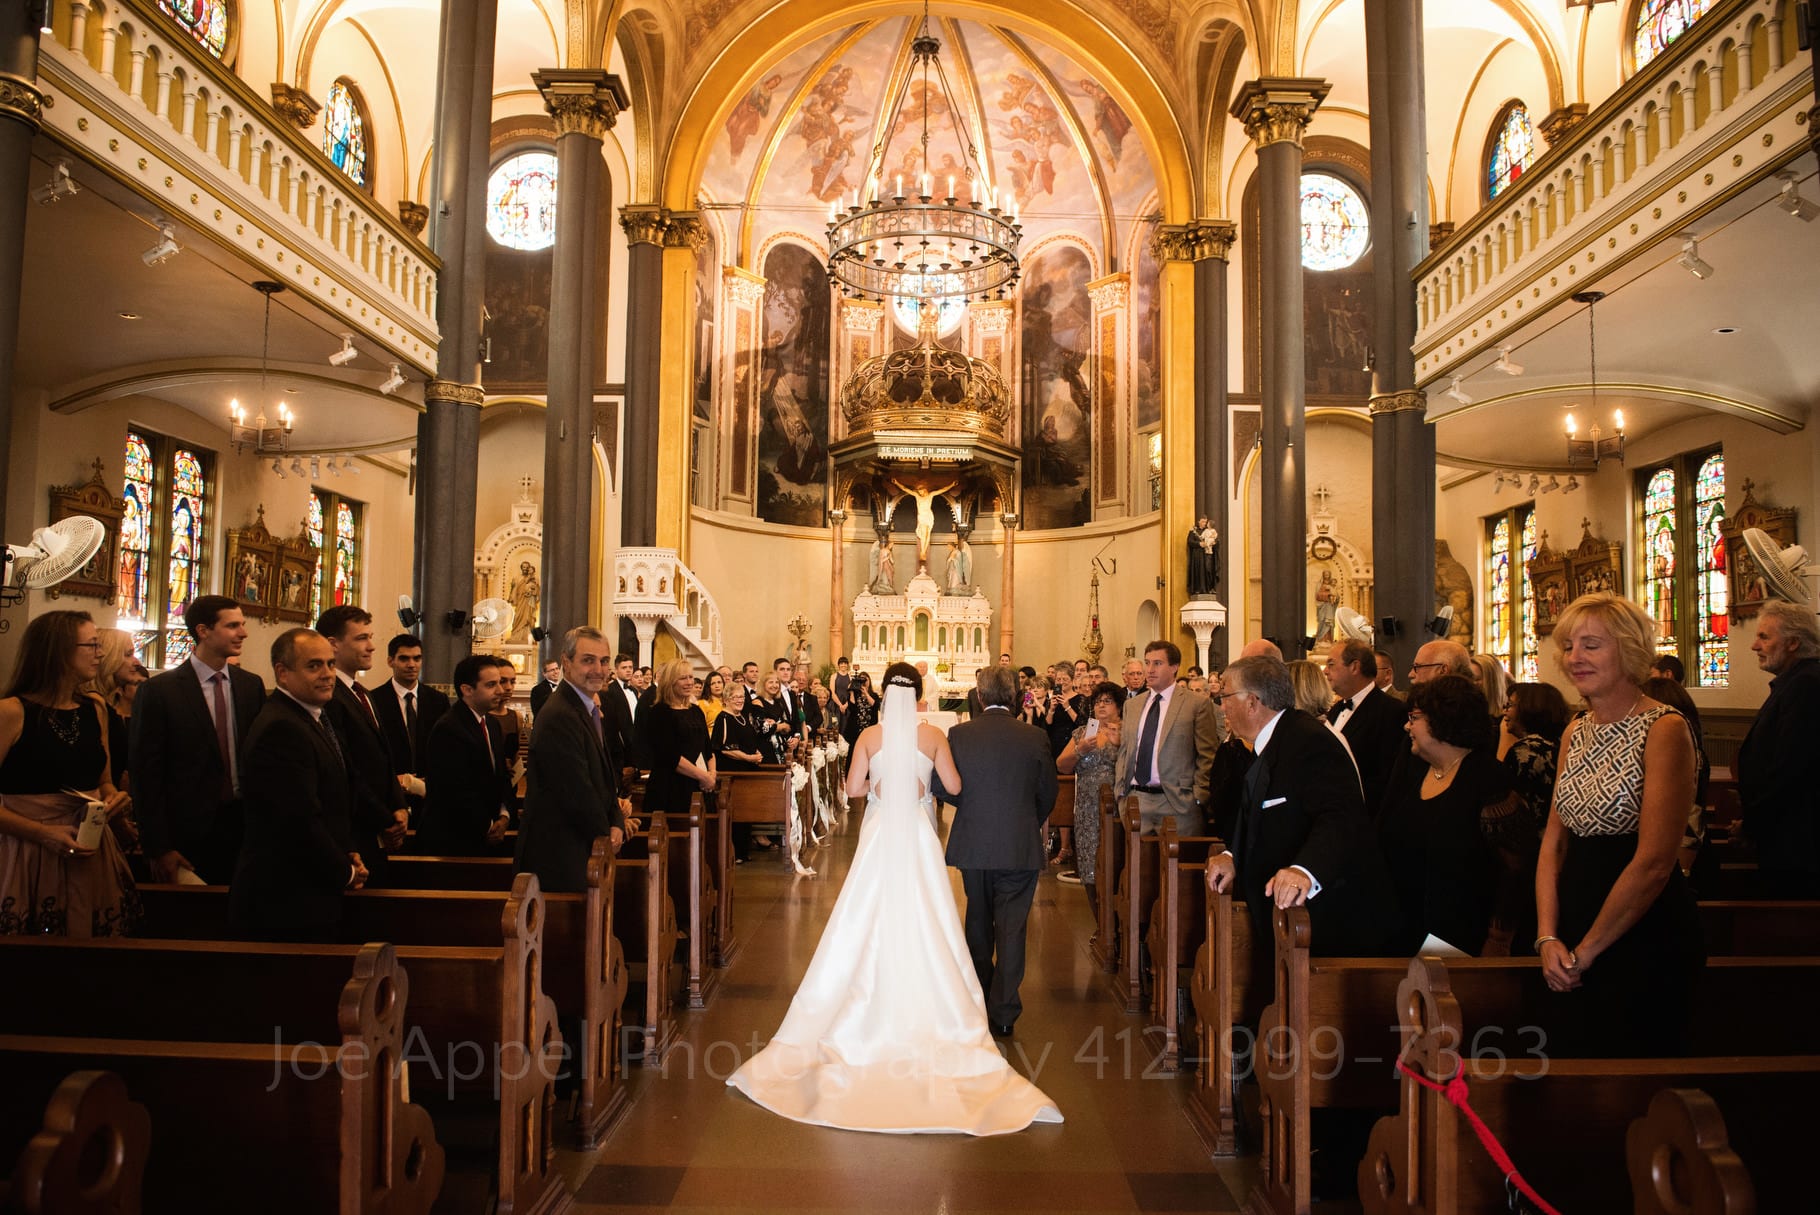 Viewed from behind, a bride and her father walk down the aisle at St. Stanislaus church.